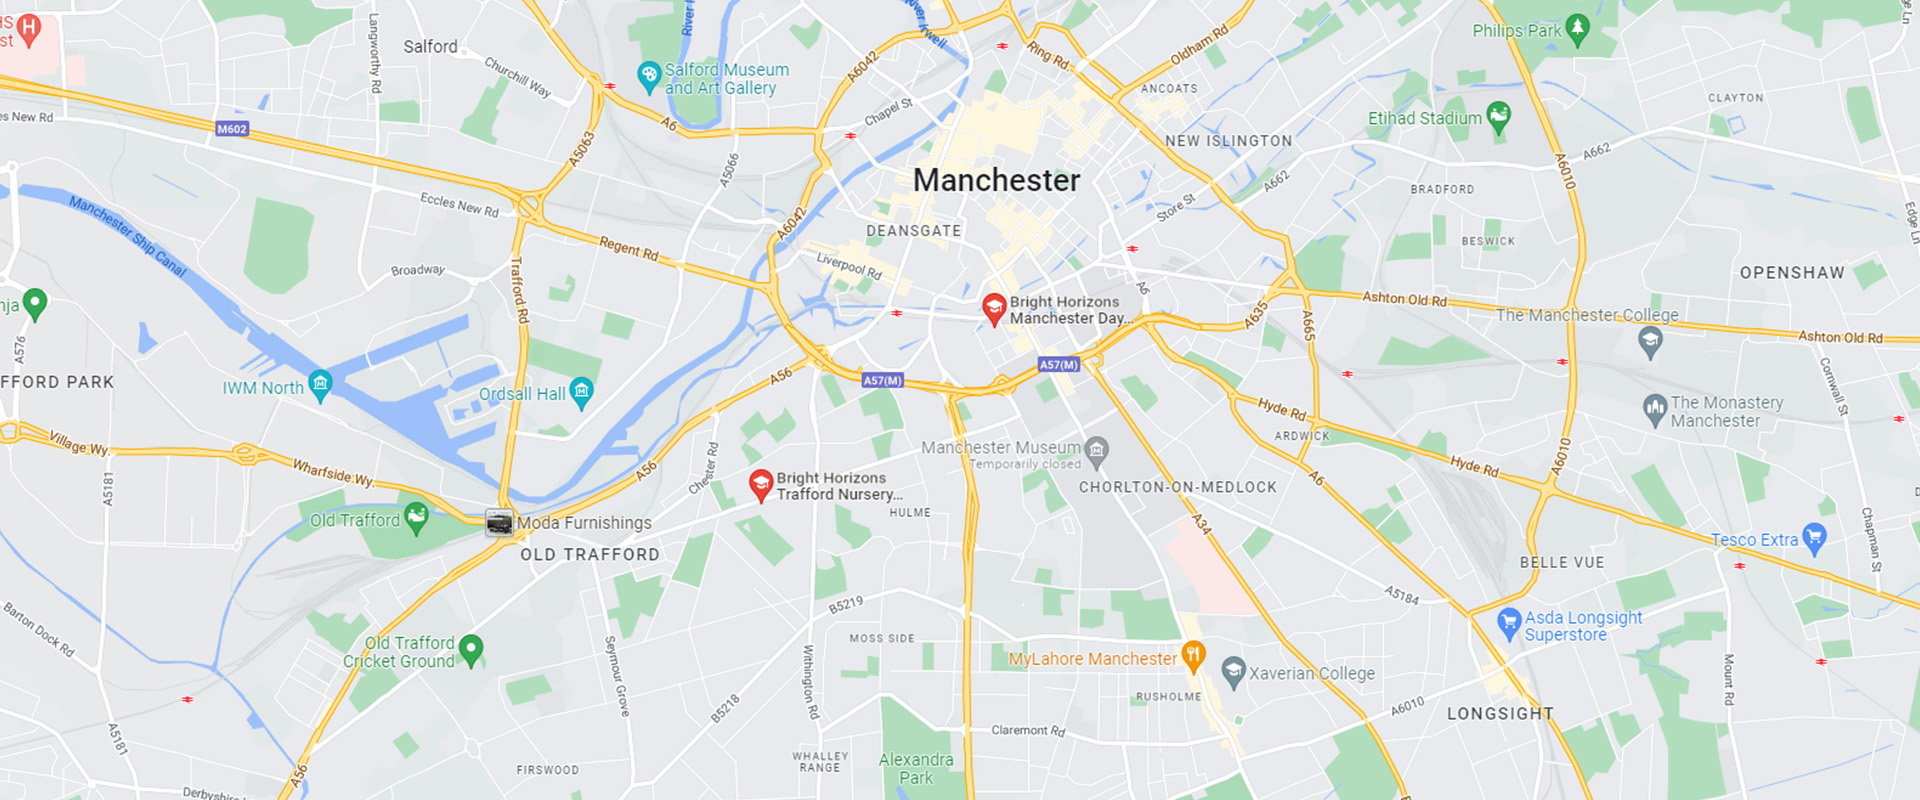 Day Nurseries and Preschools in Manchester City Centre